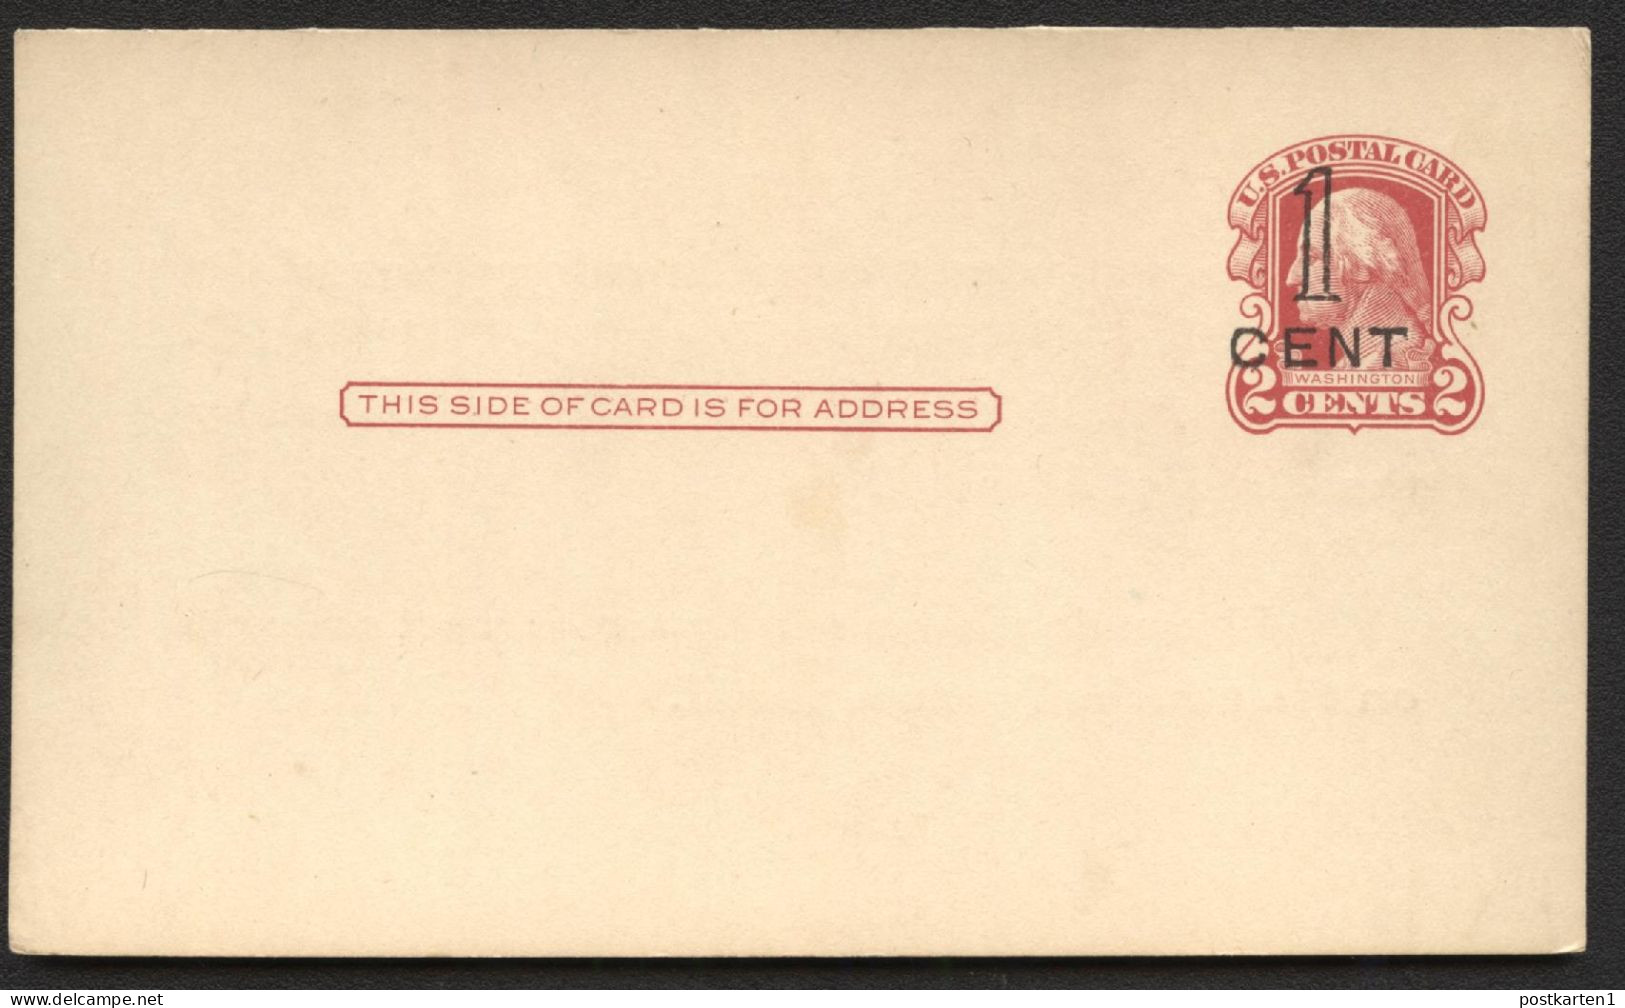 UY9m-12 Message Card Mint Face 1920 - 1901-20